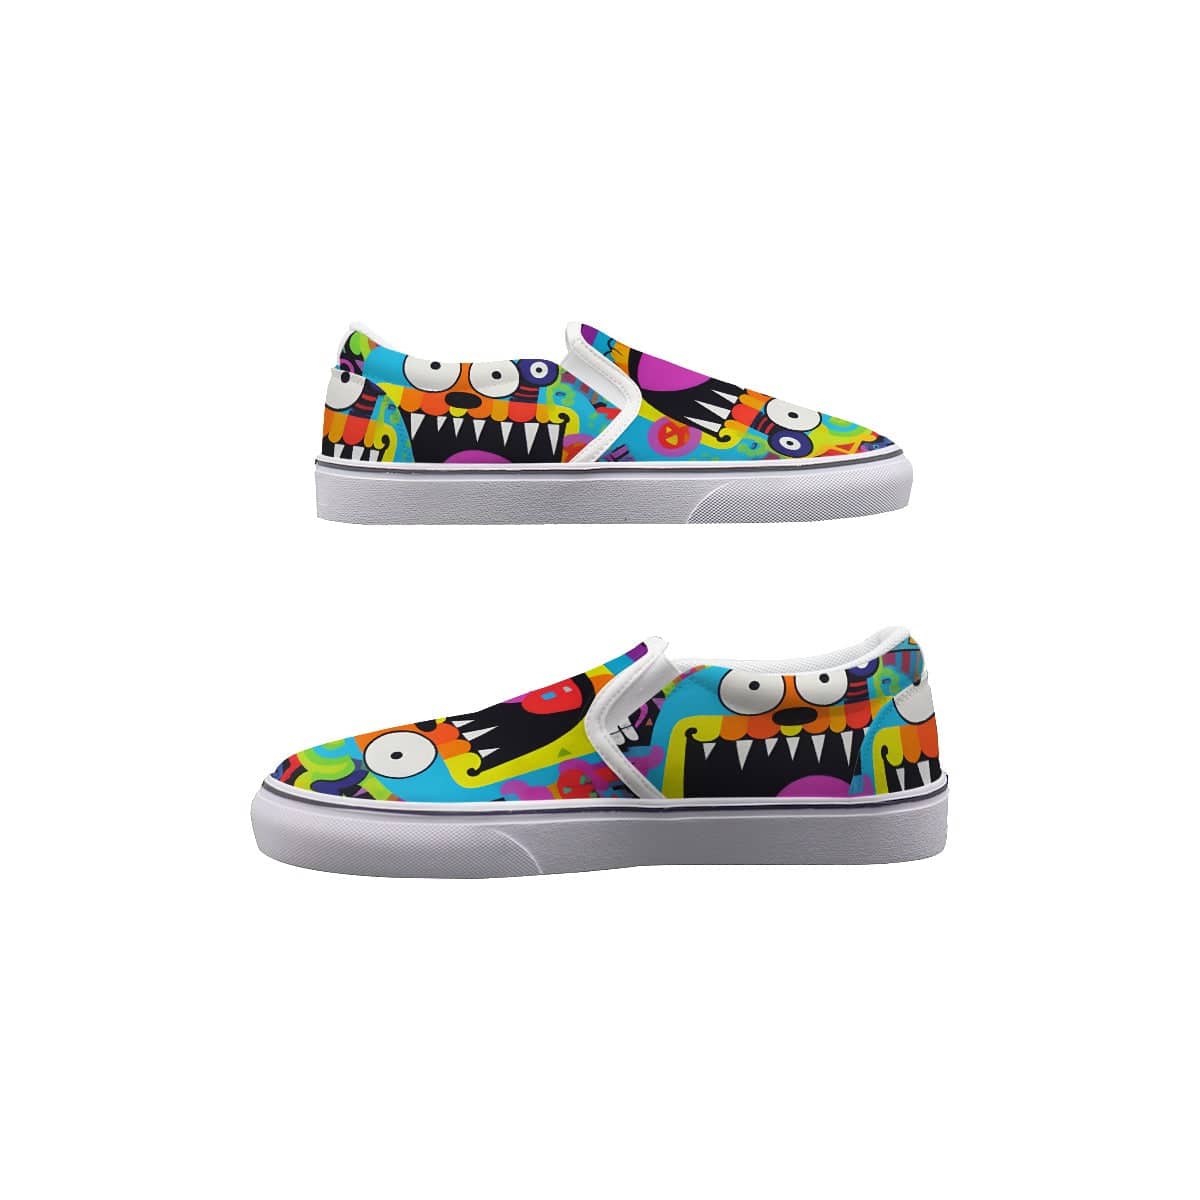 Yoycol Abstract Amigos - Women's Slip On Sneakers